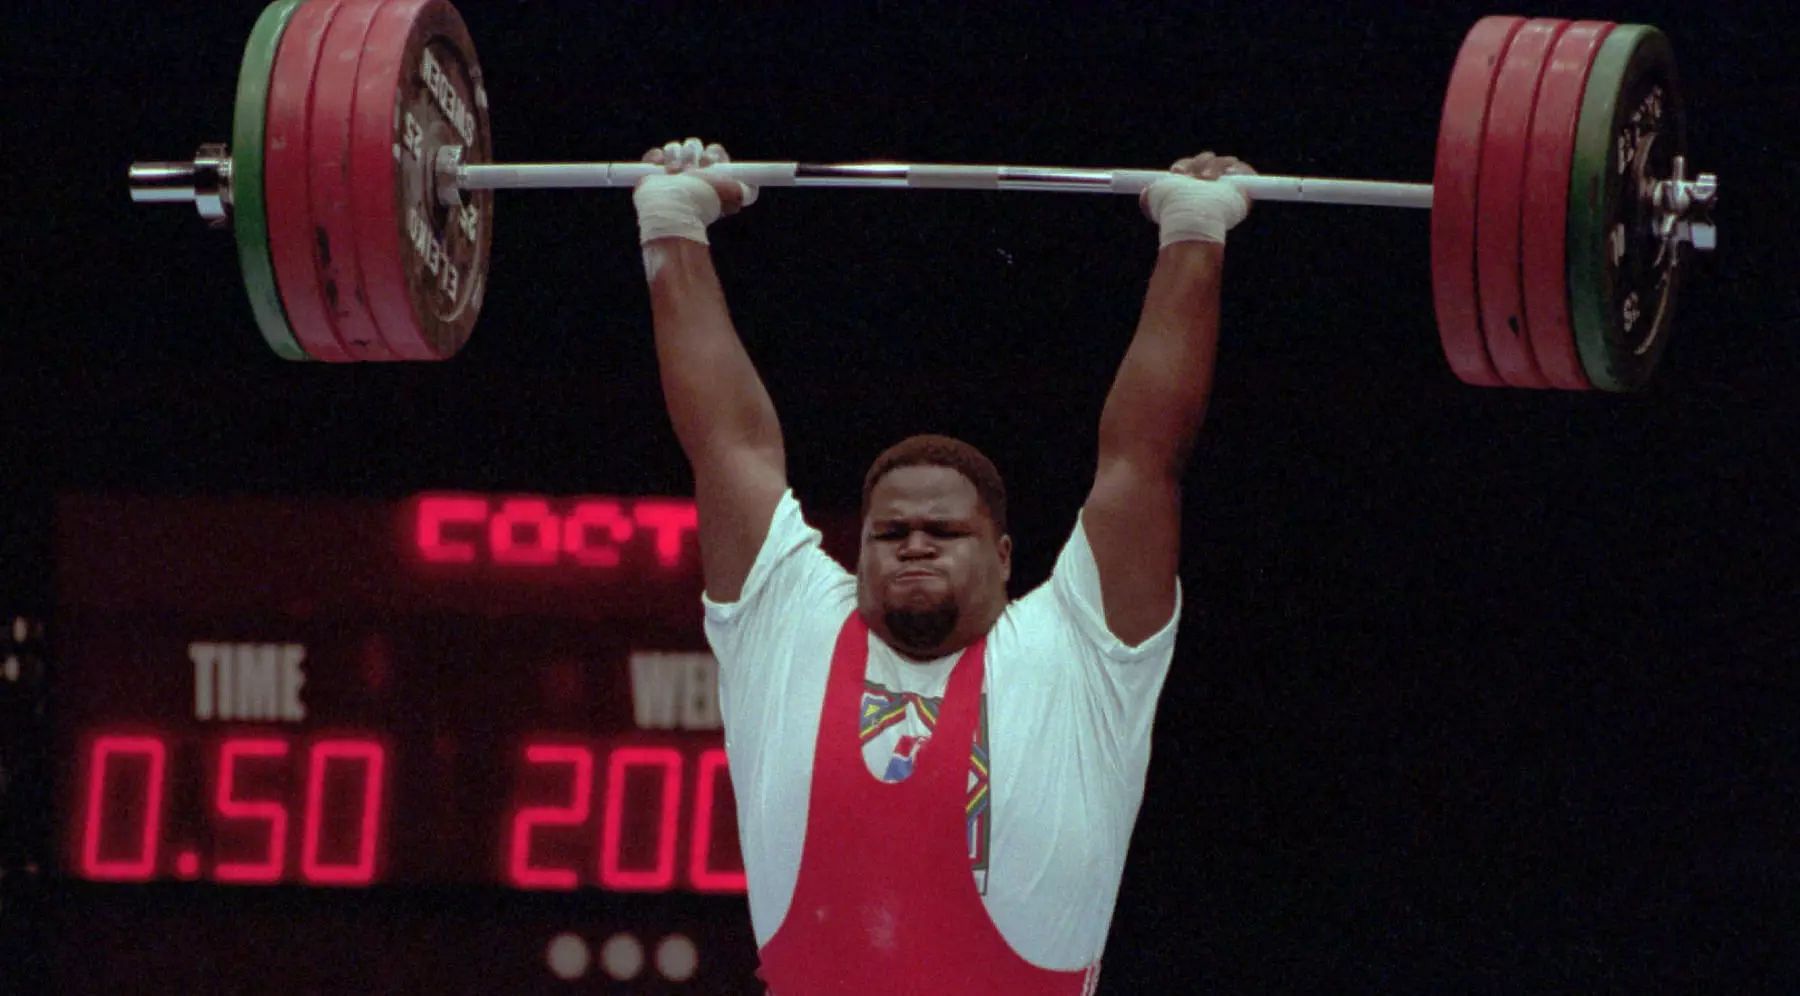 Mark Henry competing as a super heavyweight weightlifter in the Olympics